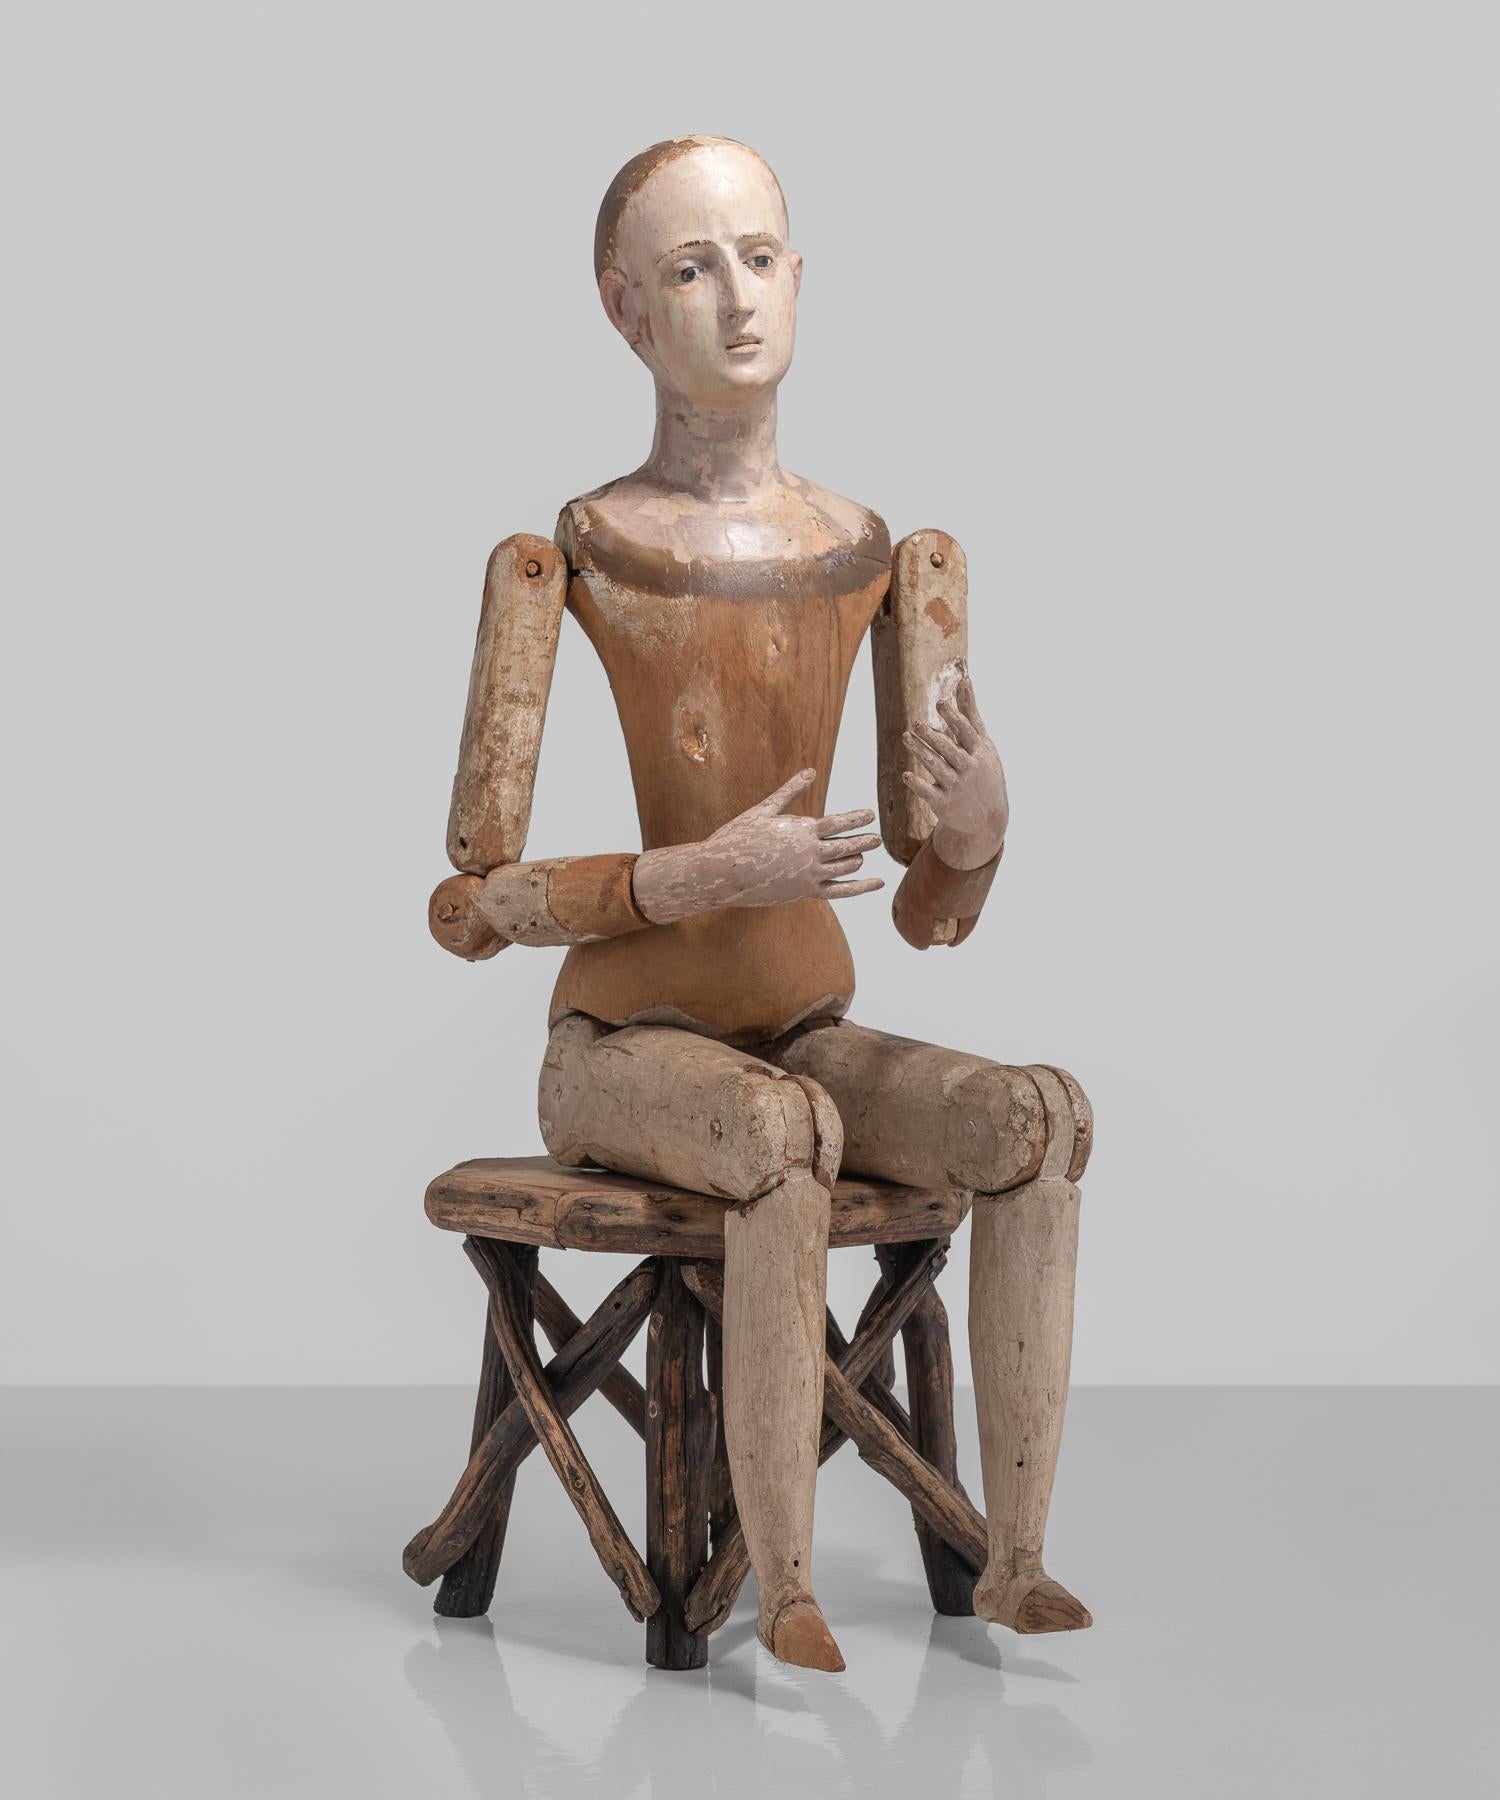 Santos figure, Italy, 19th century.

Stunning original patina, unusually large size, with beautifully painted hands and face.

Measures: 12